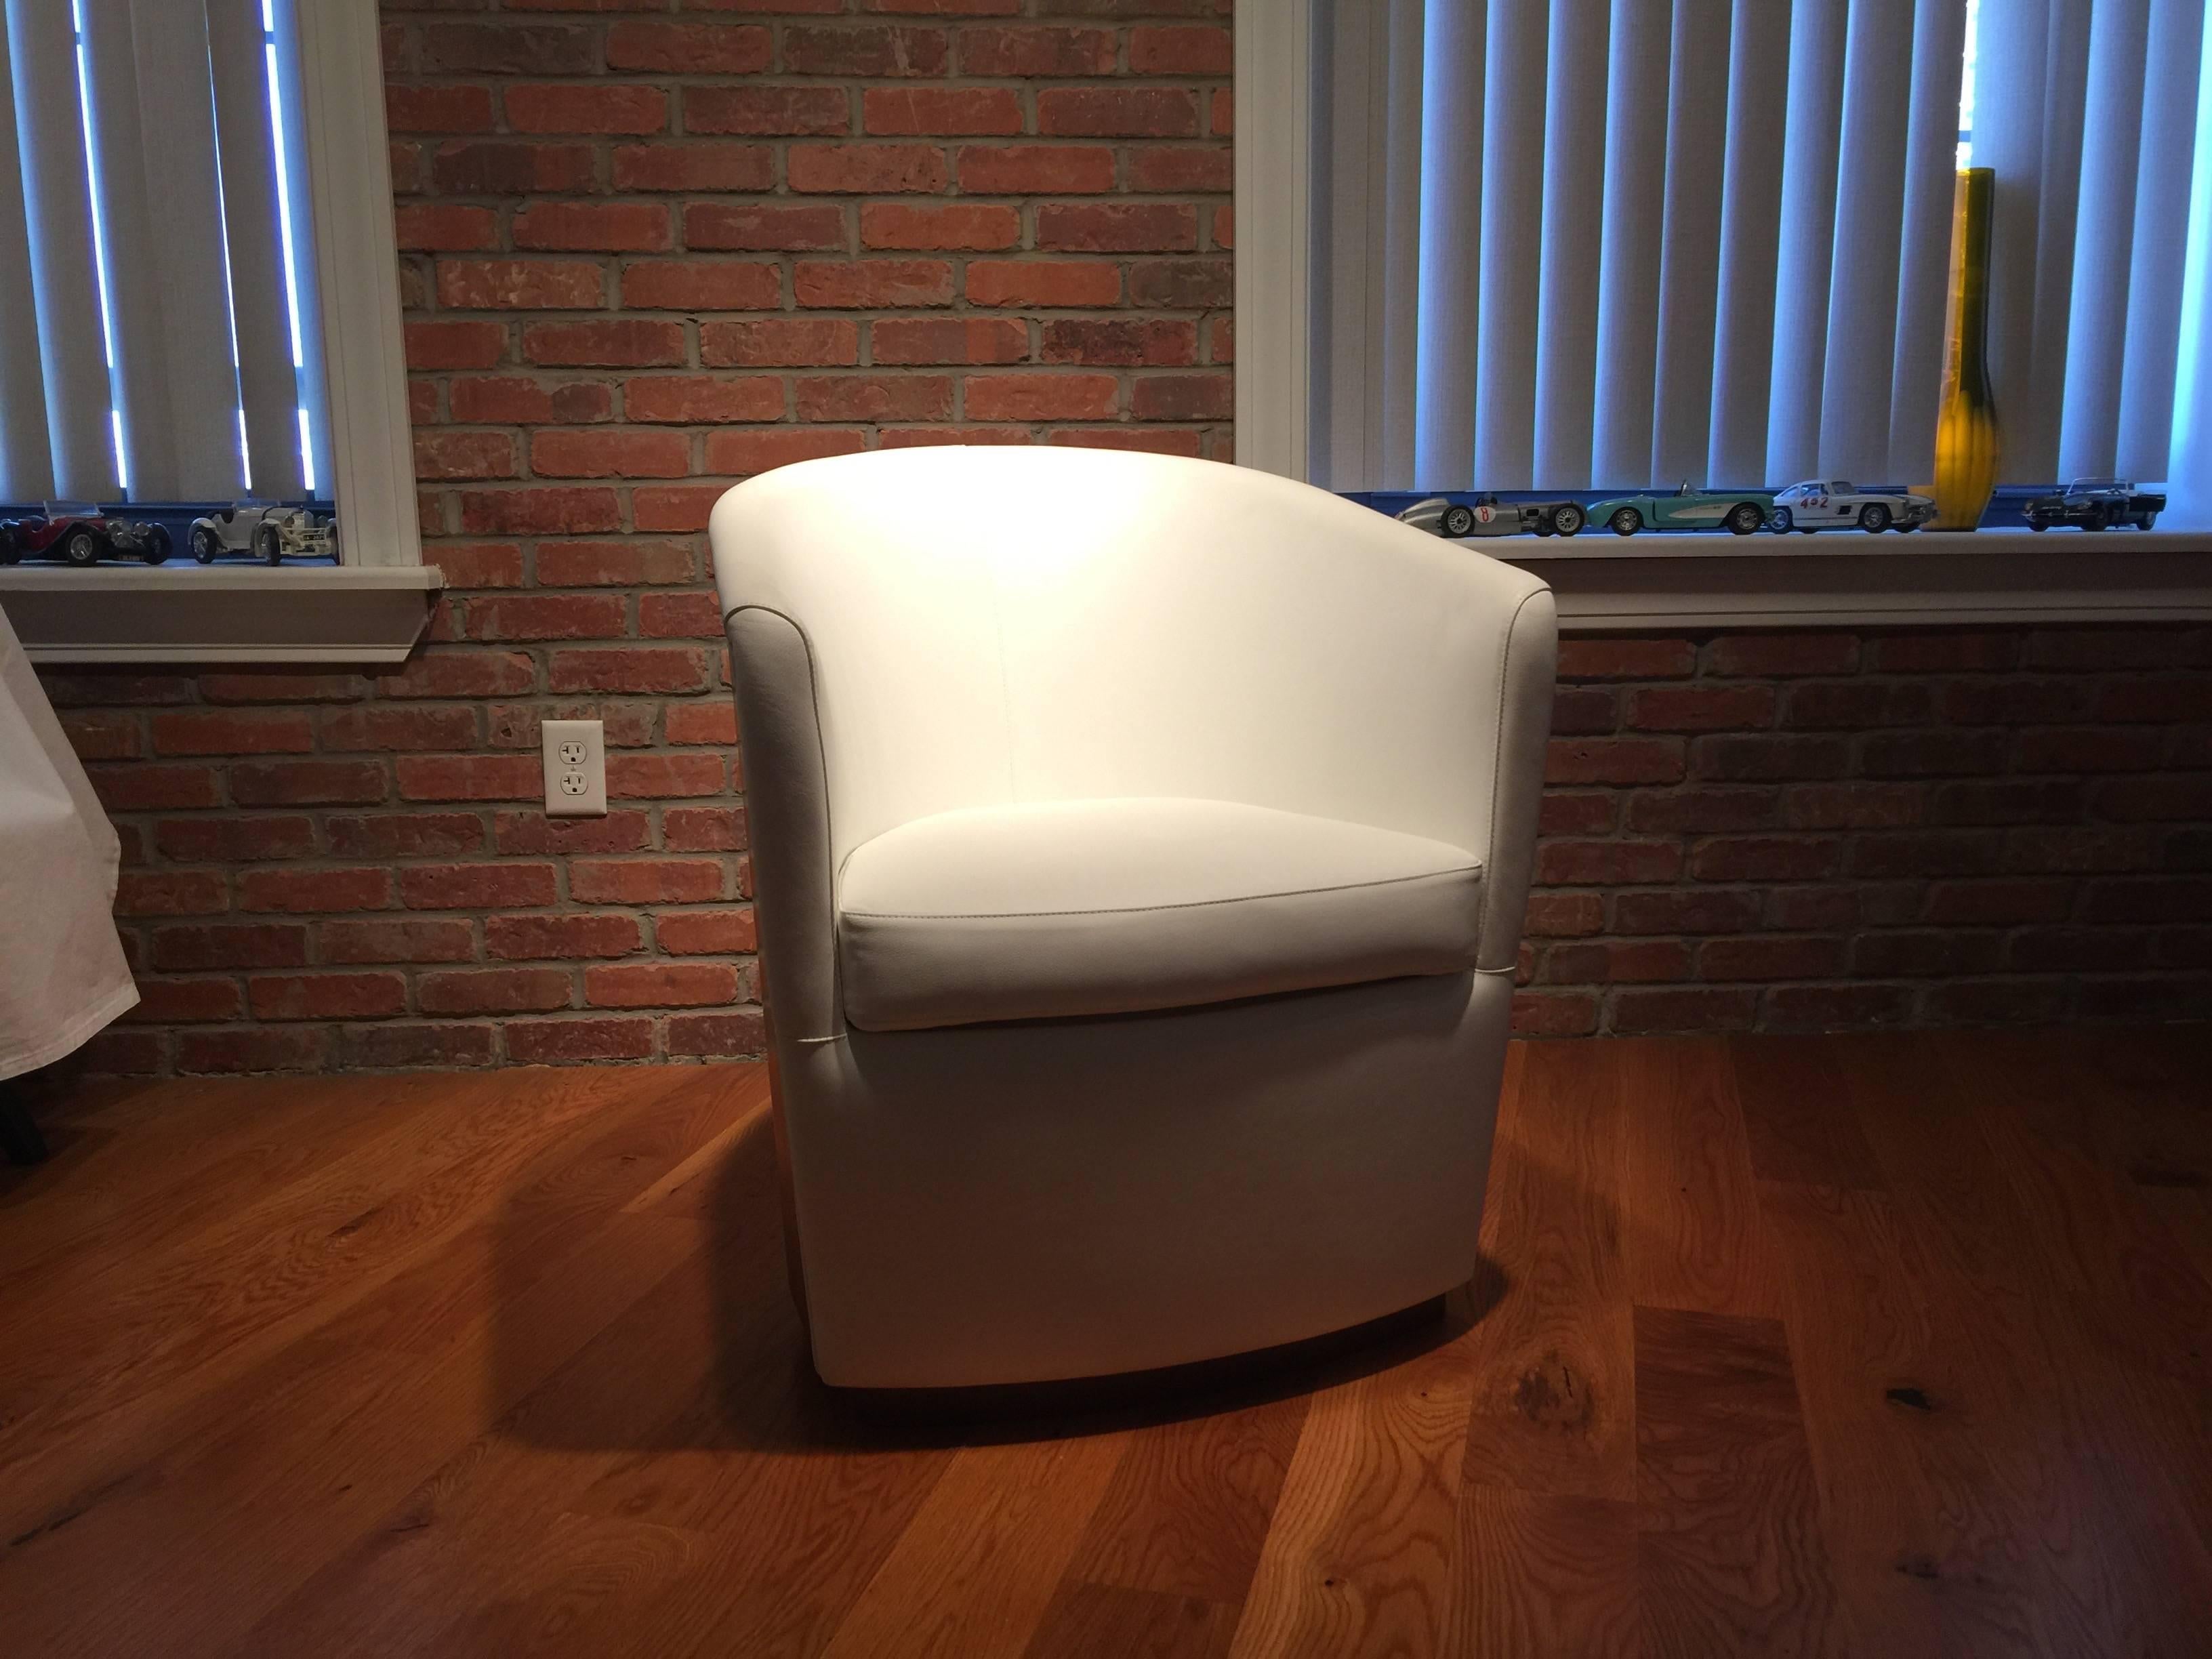 A modern designer Italian armchair, made of a walnut finished curved wood back and base with white leather upholstery. From display, very good condition, on sale. Retail price was 4,000$. The armchair swing left and right and returns to its original